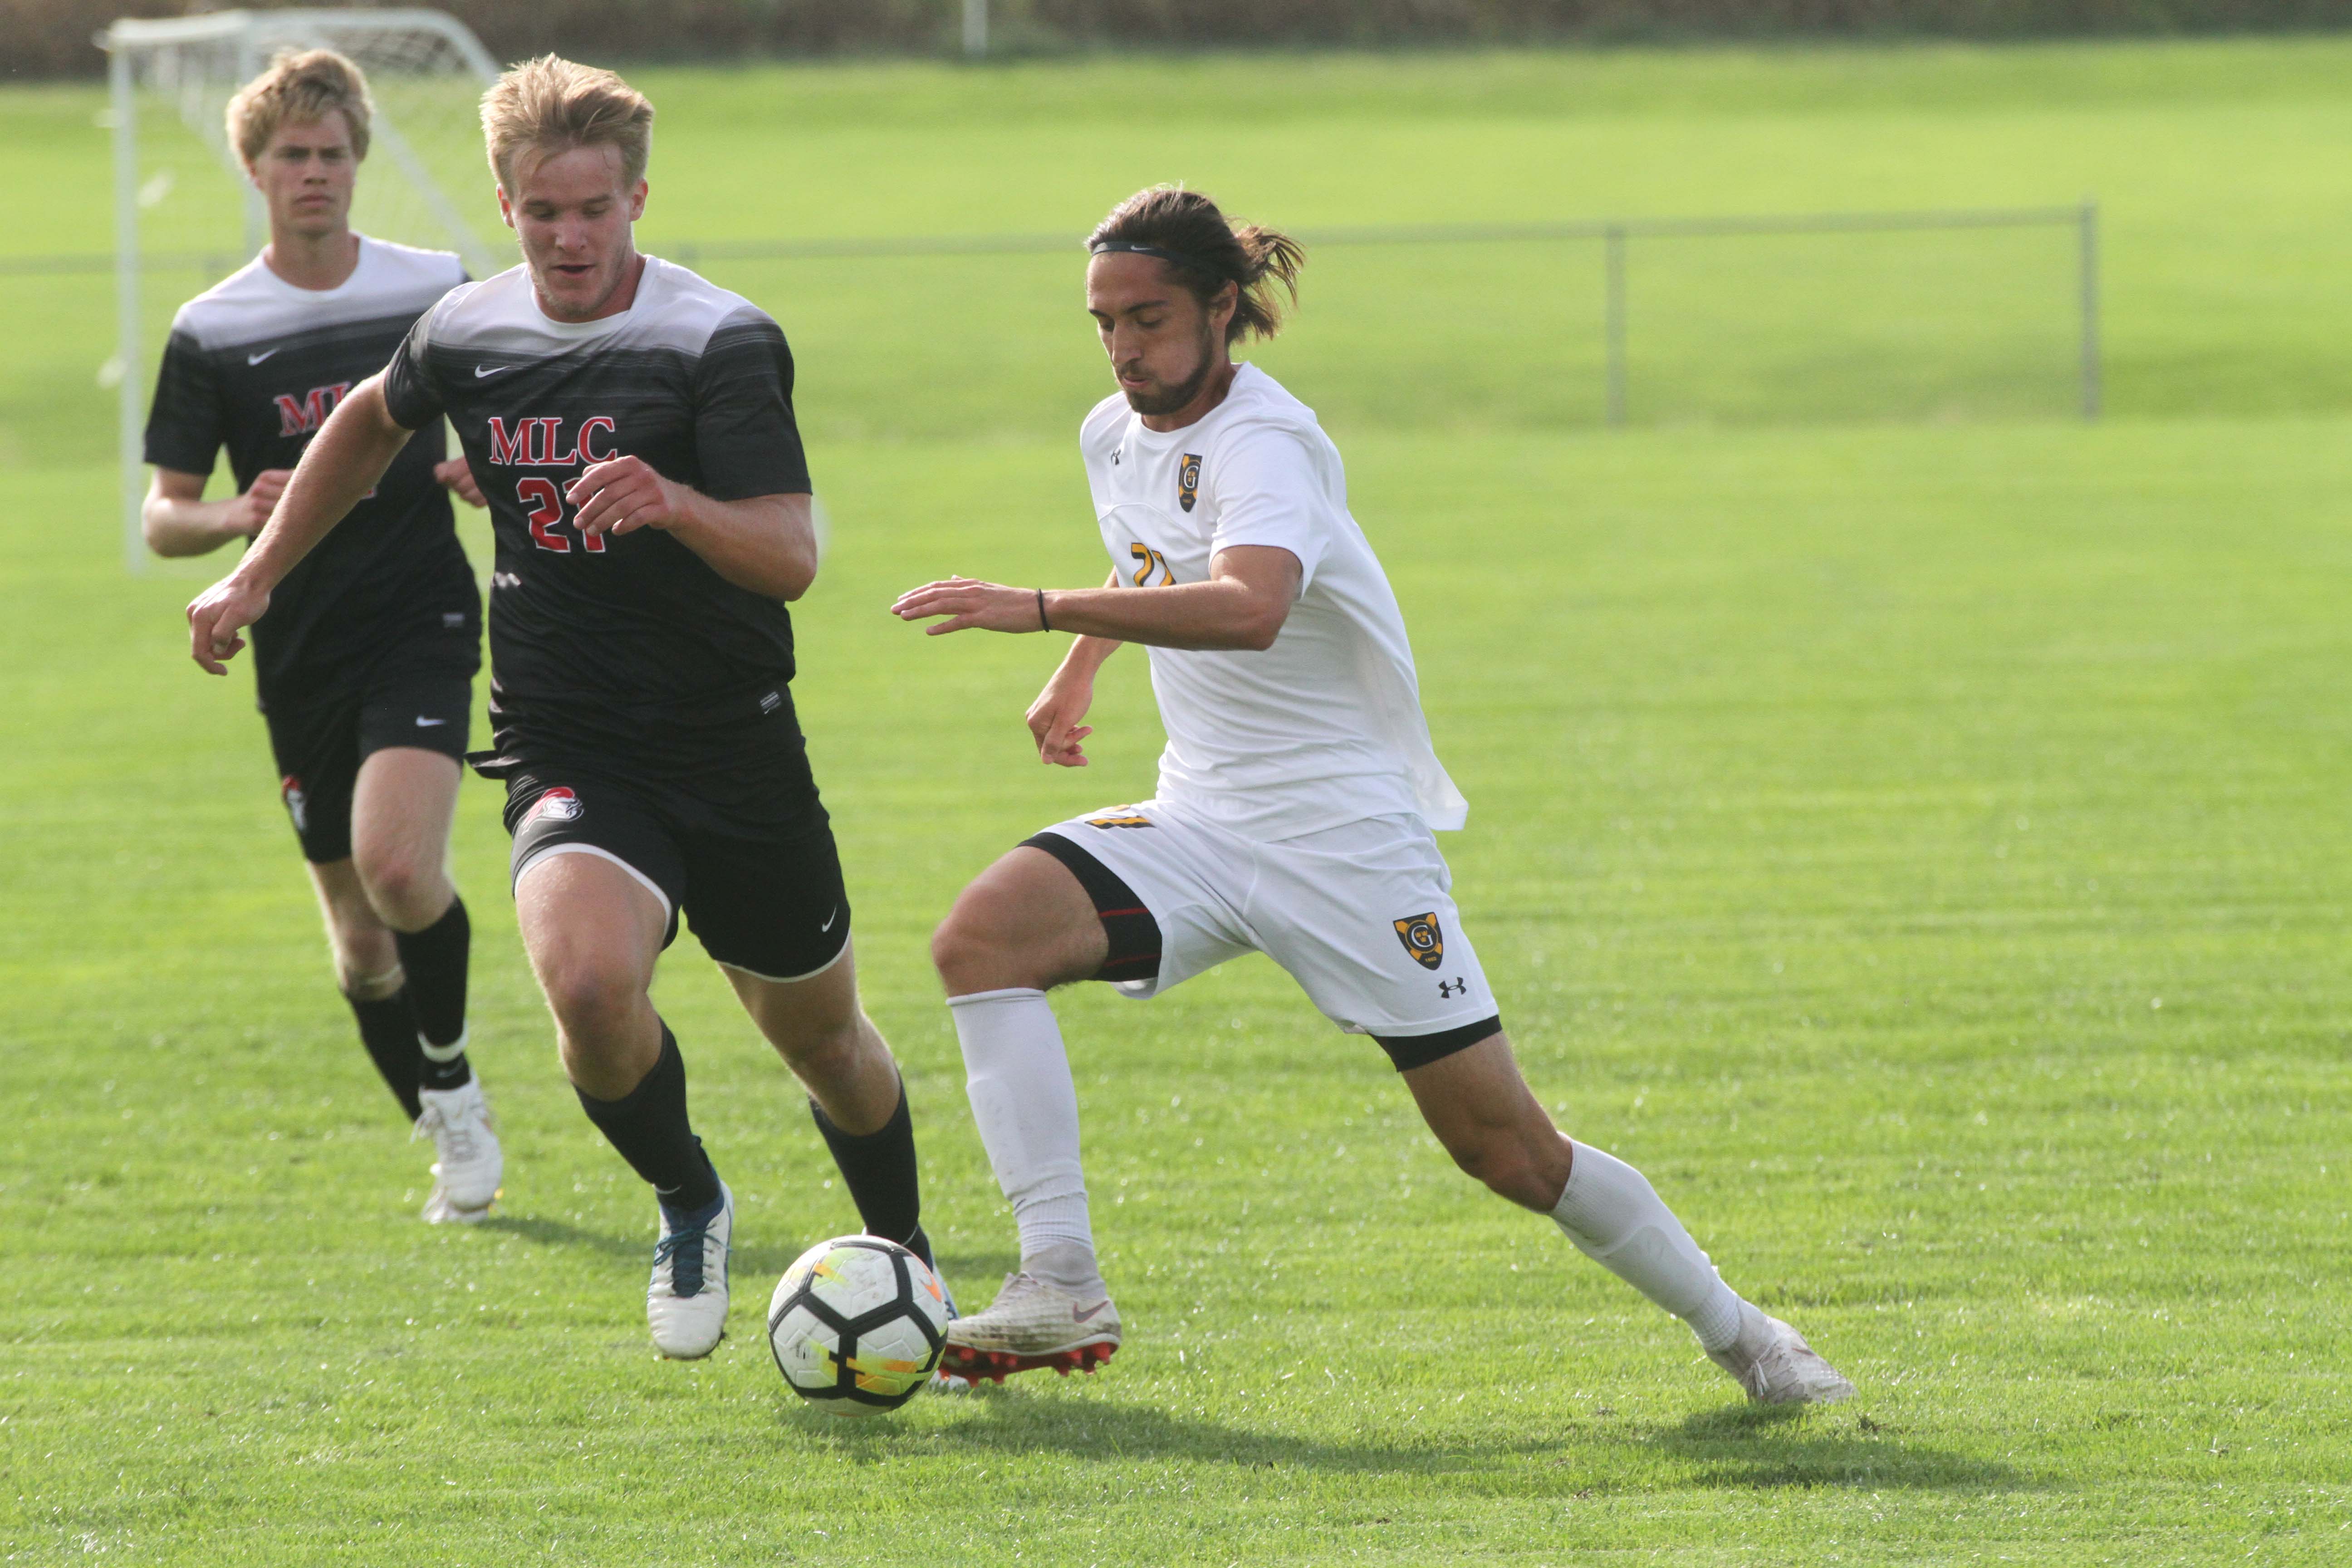 Junior Luke Laurich dribbles the ball past a Martin Luther midfielder.